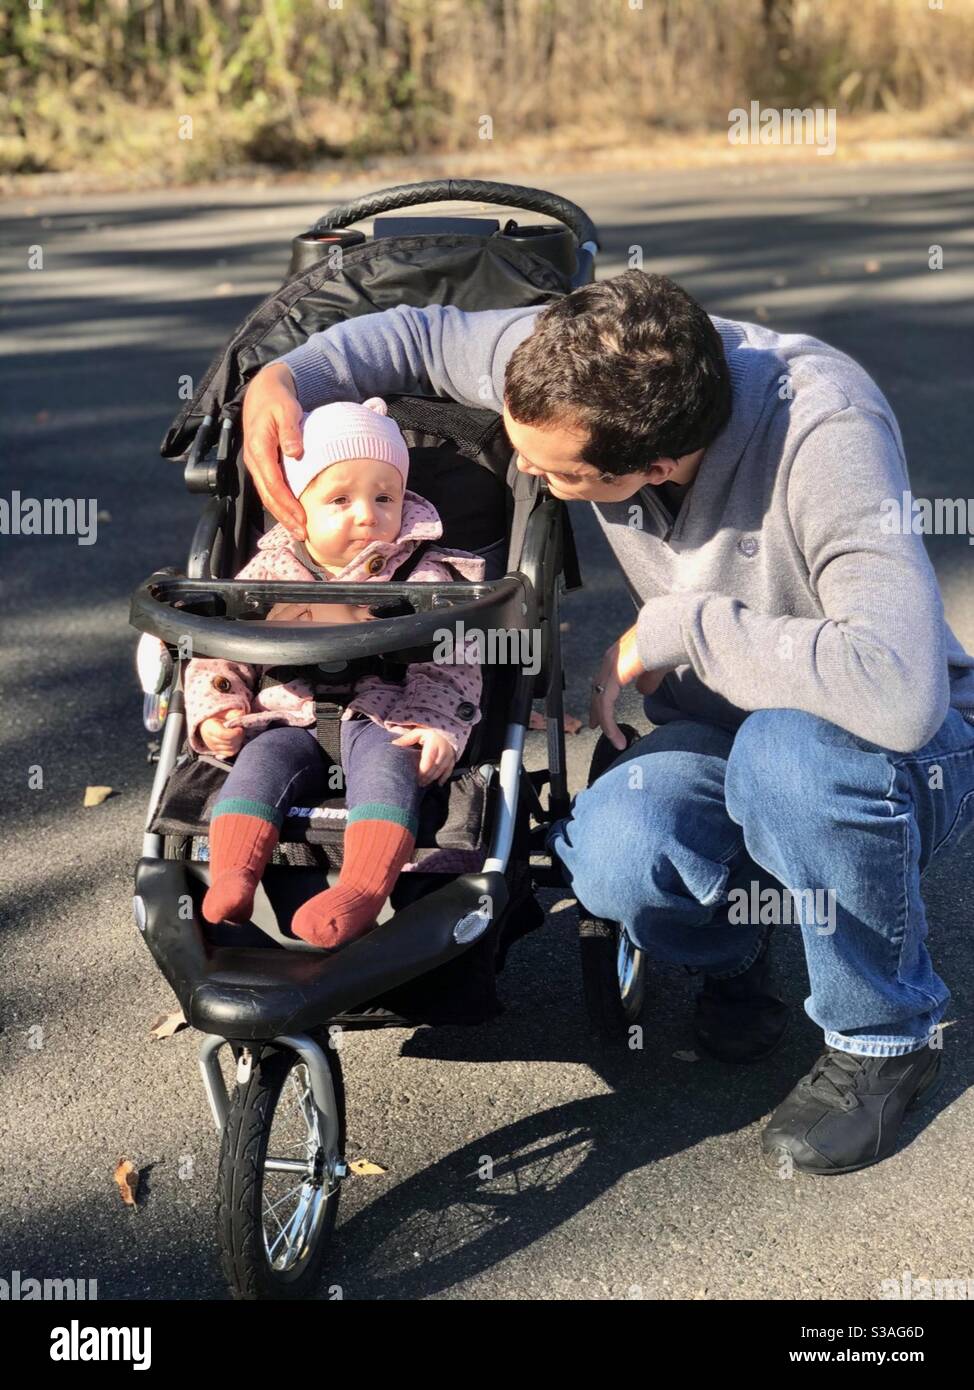 Dad caressing baby daughter’s face in a stroller. Stock Photo